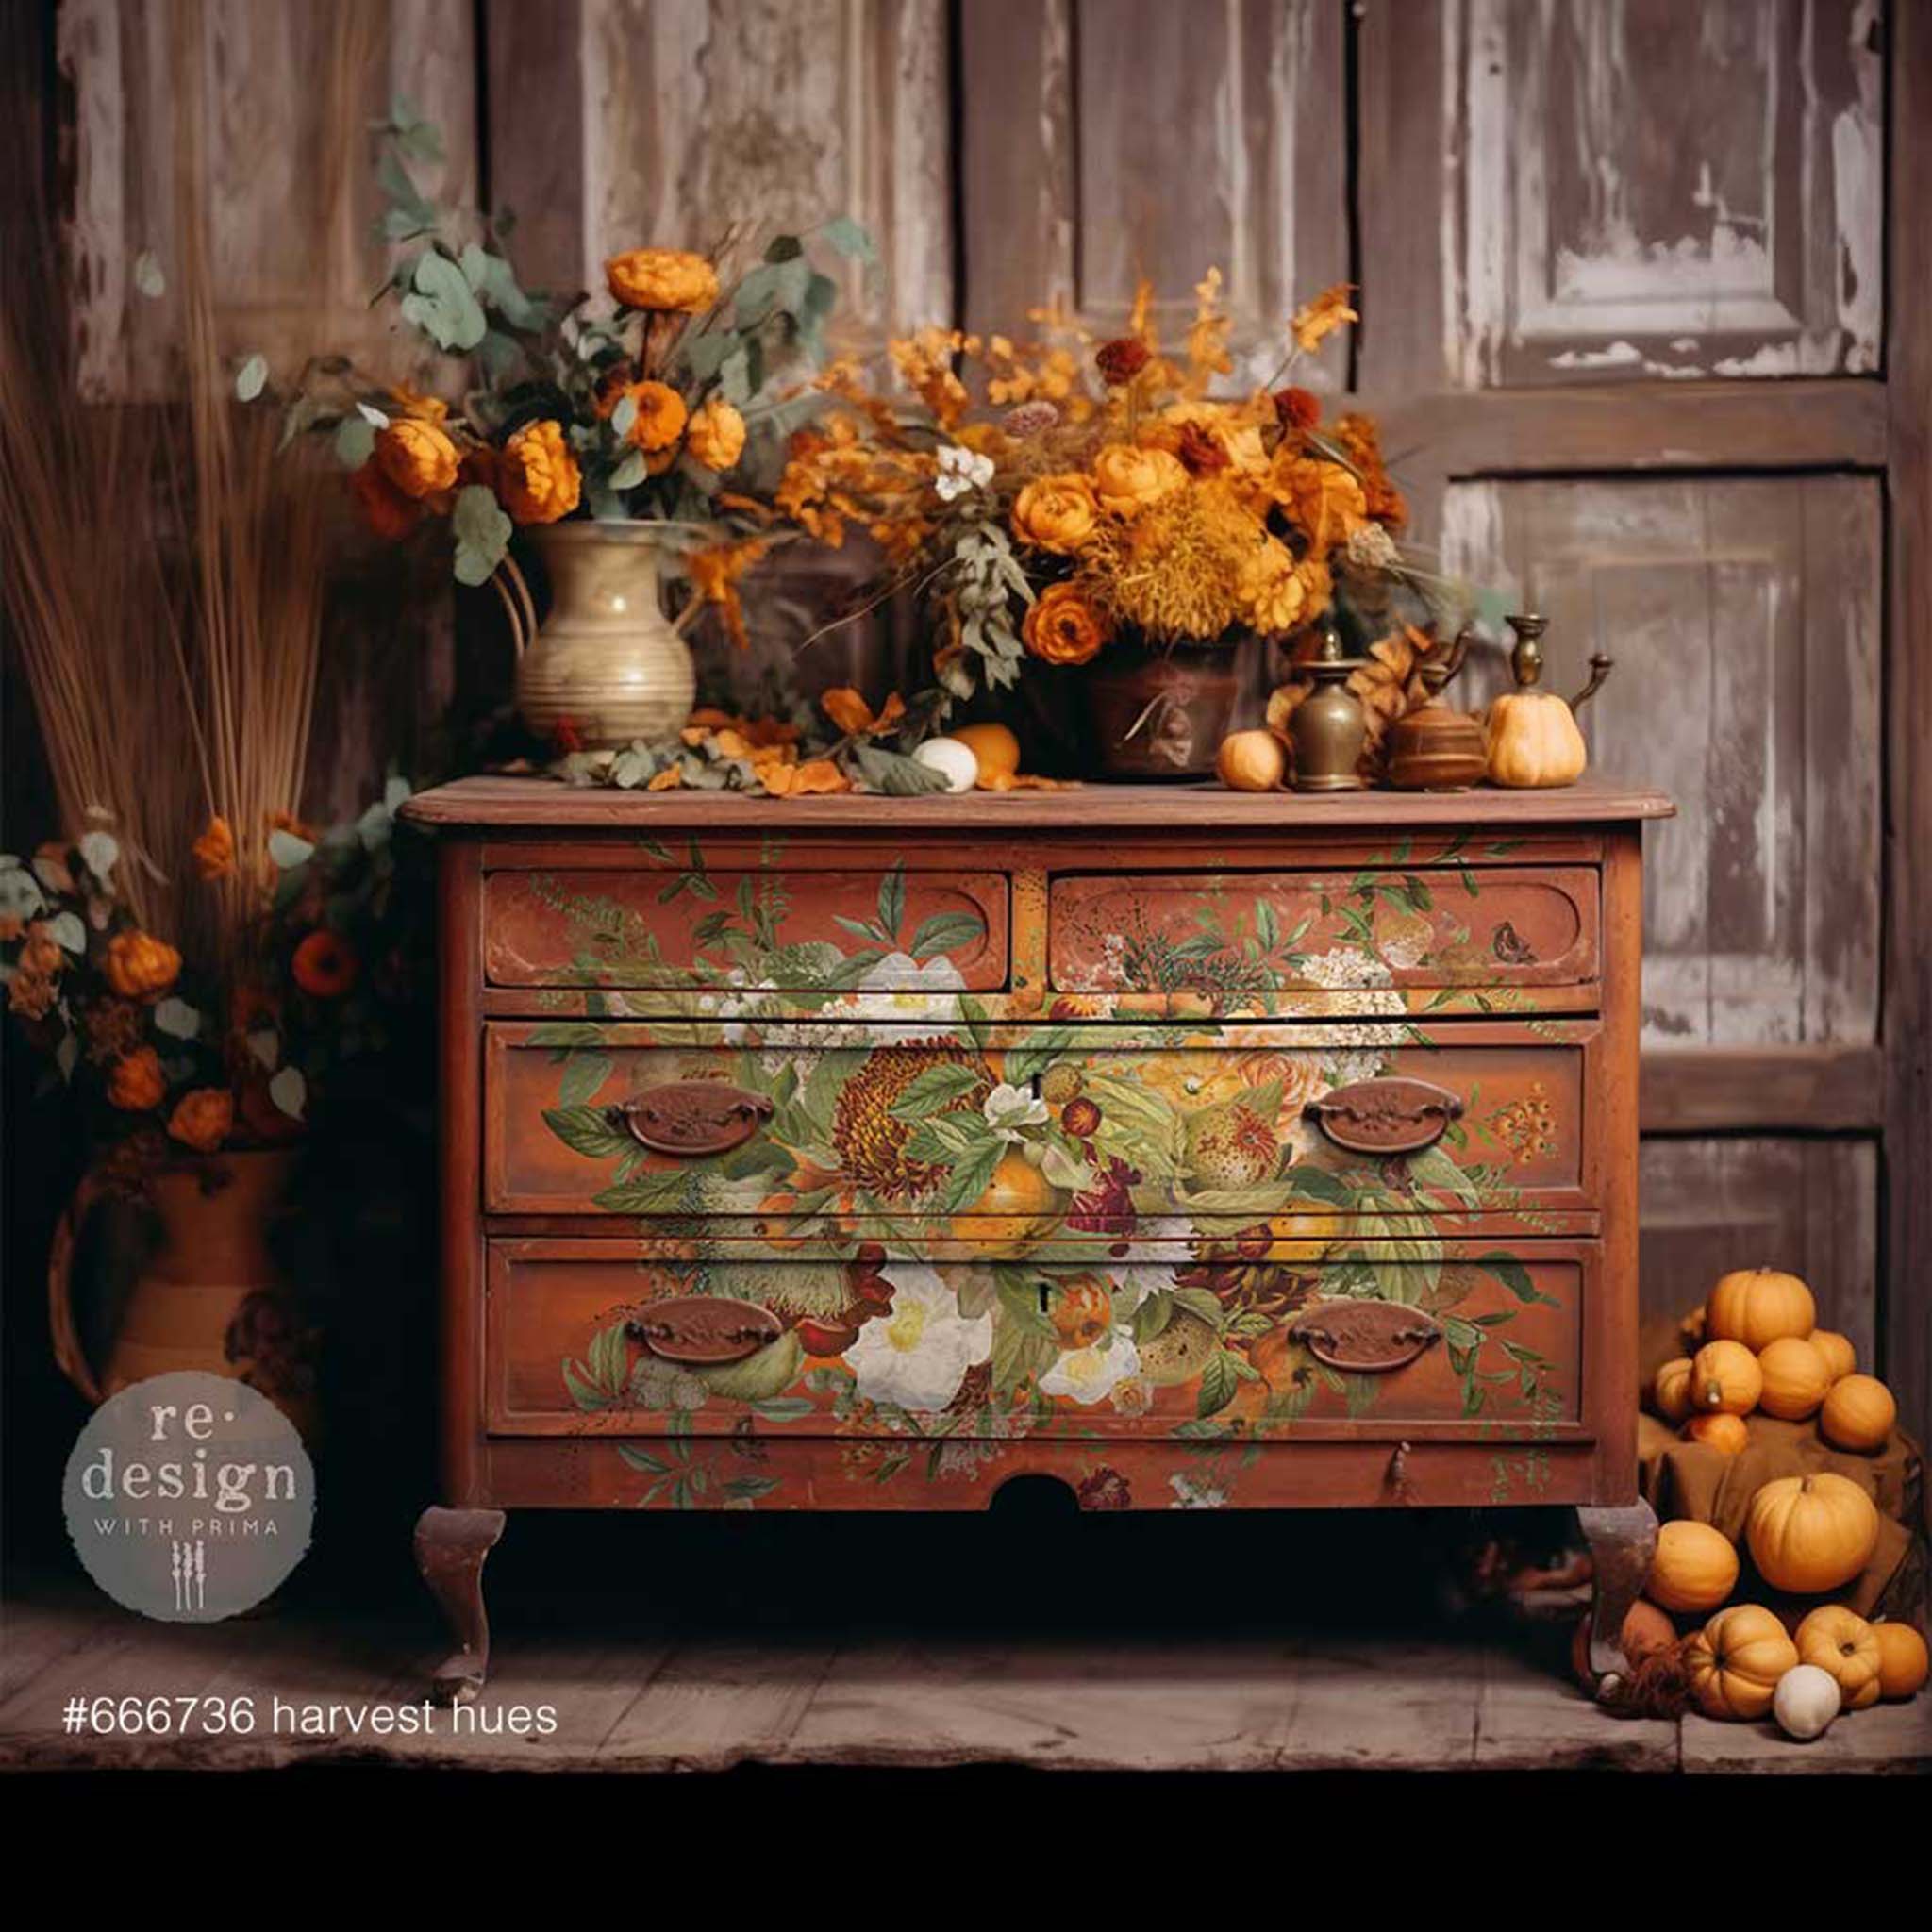 A vintage dresser is painted rust red and features ReDesign with Prima's Harvest Hues transfer on it.